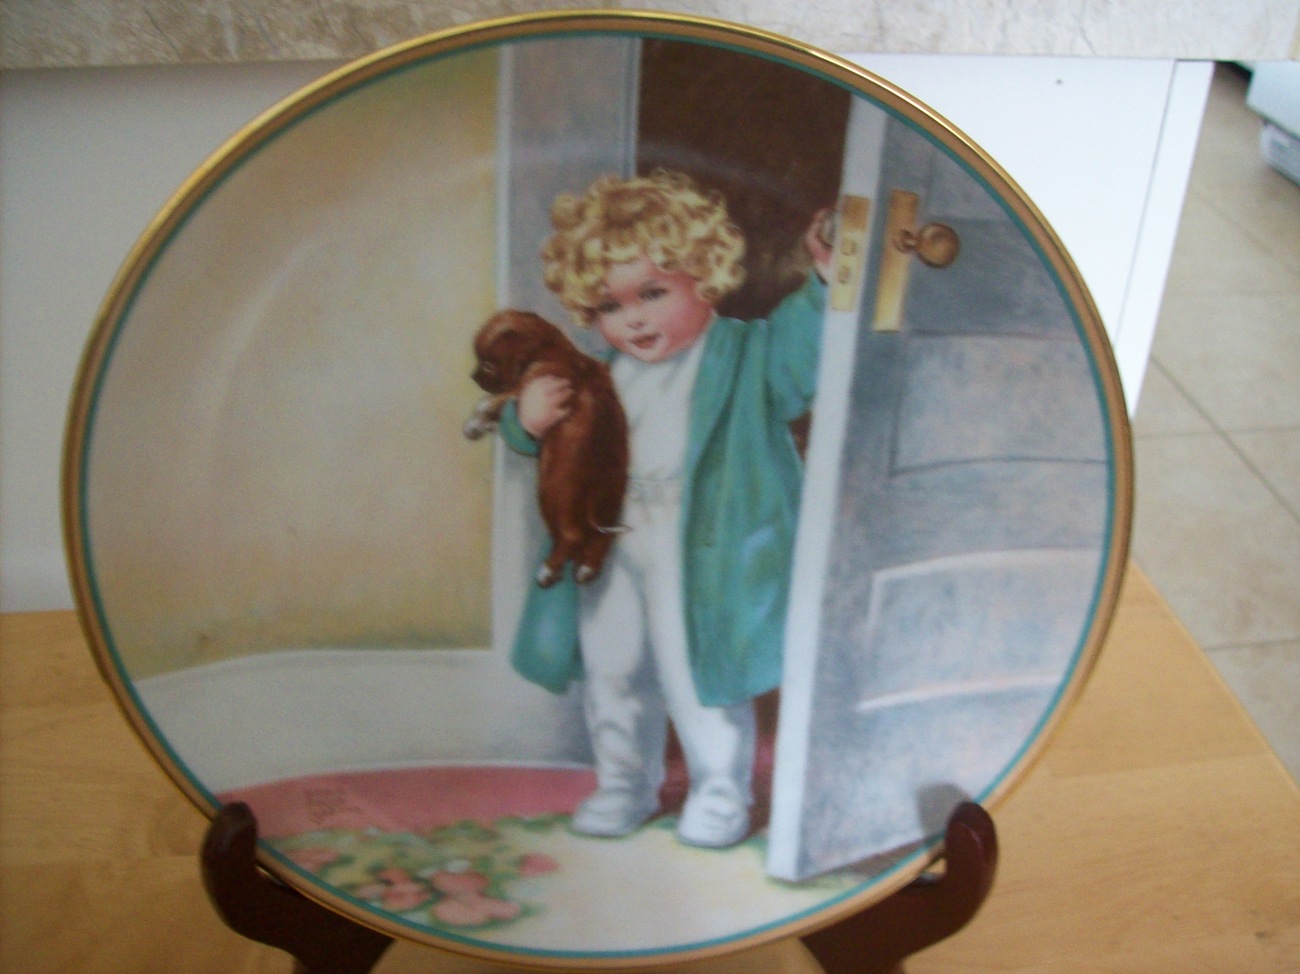 Primary image for Hamilton Collection 1986 “Good Morning” Collector’s Plate